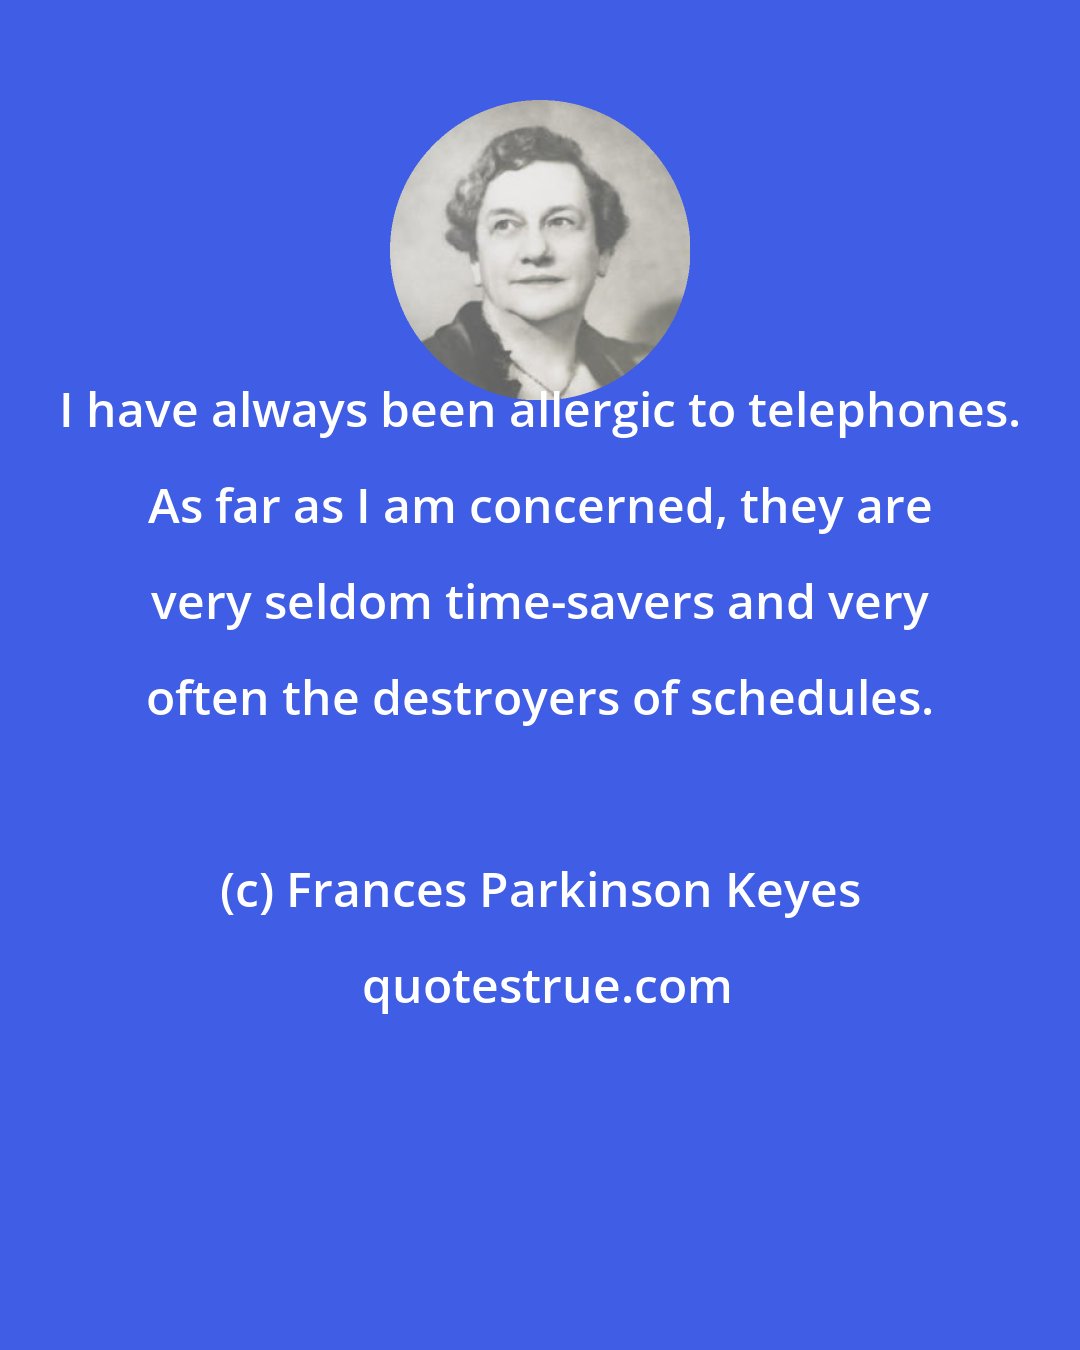 Frances Parkinson Keyes: I have always been allergic to telephones. As far as I am concerned, they are very seldom time-savers and very often the destroyers of schedules.